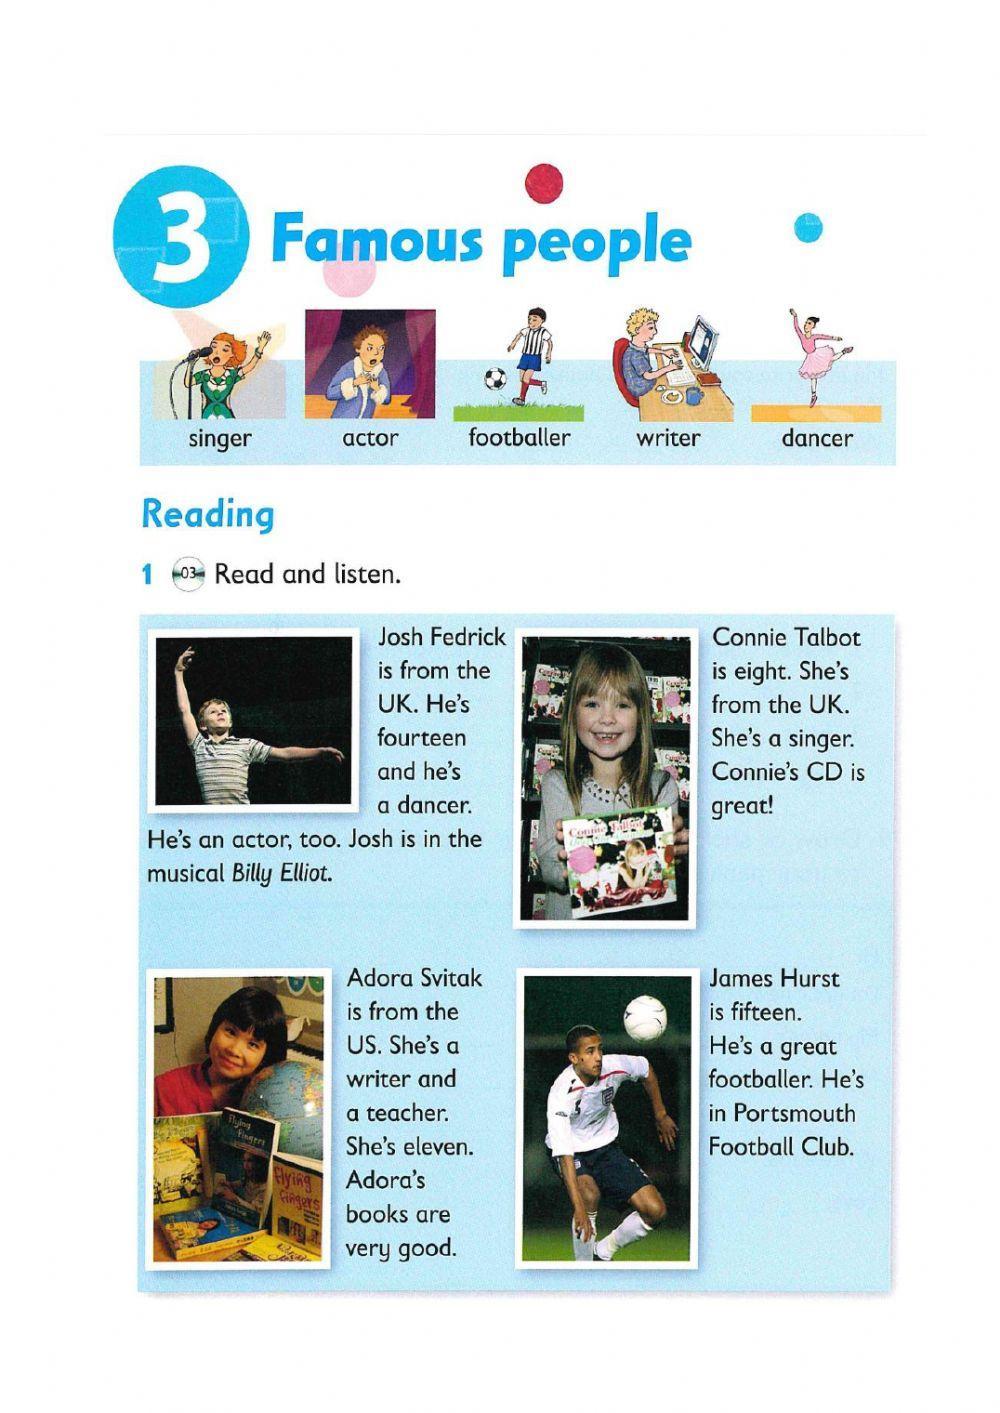 Reading and writing - Famous people